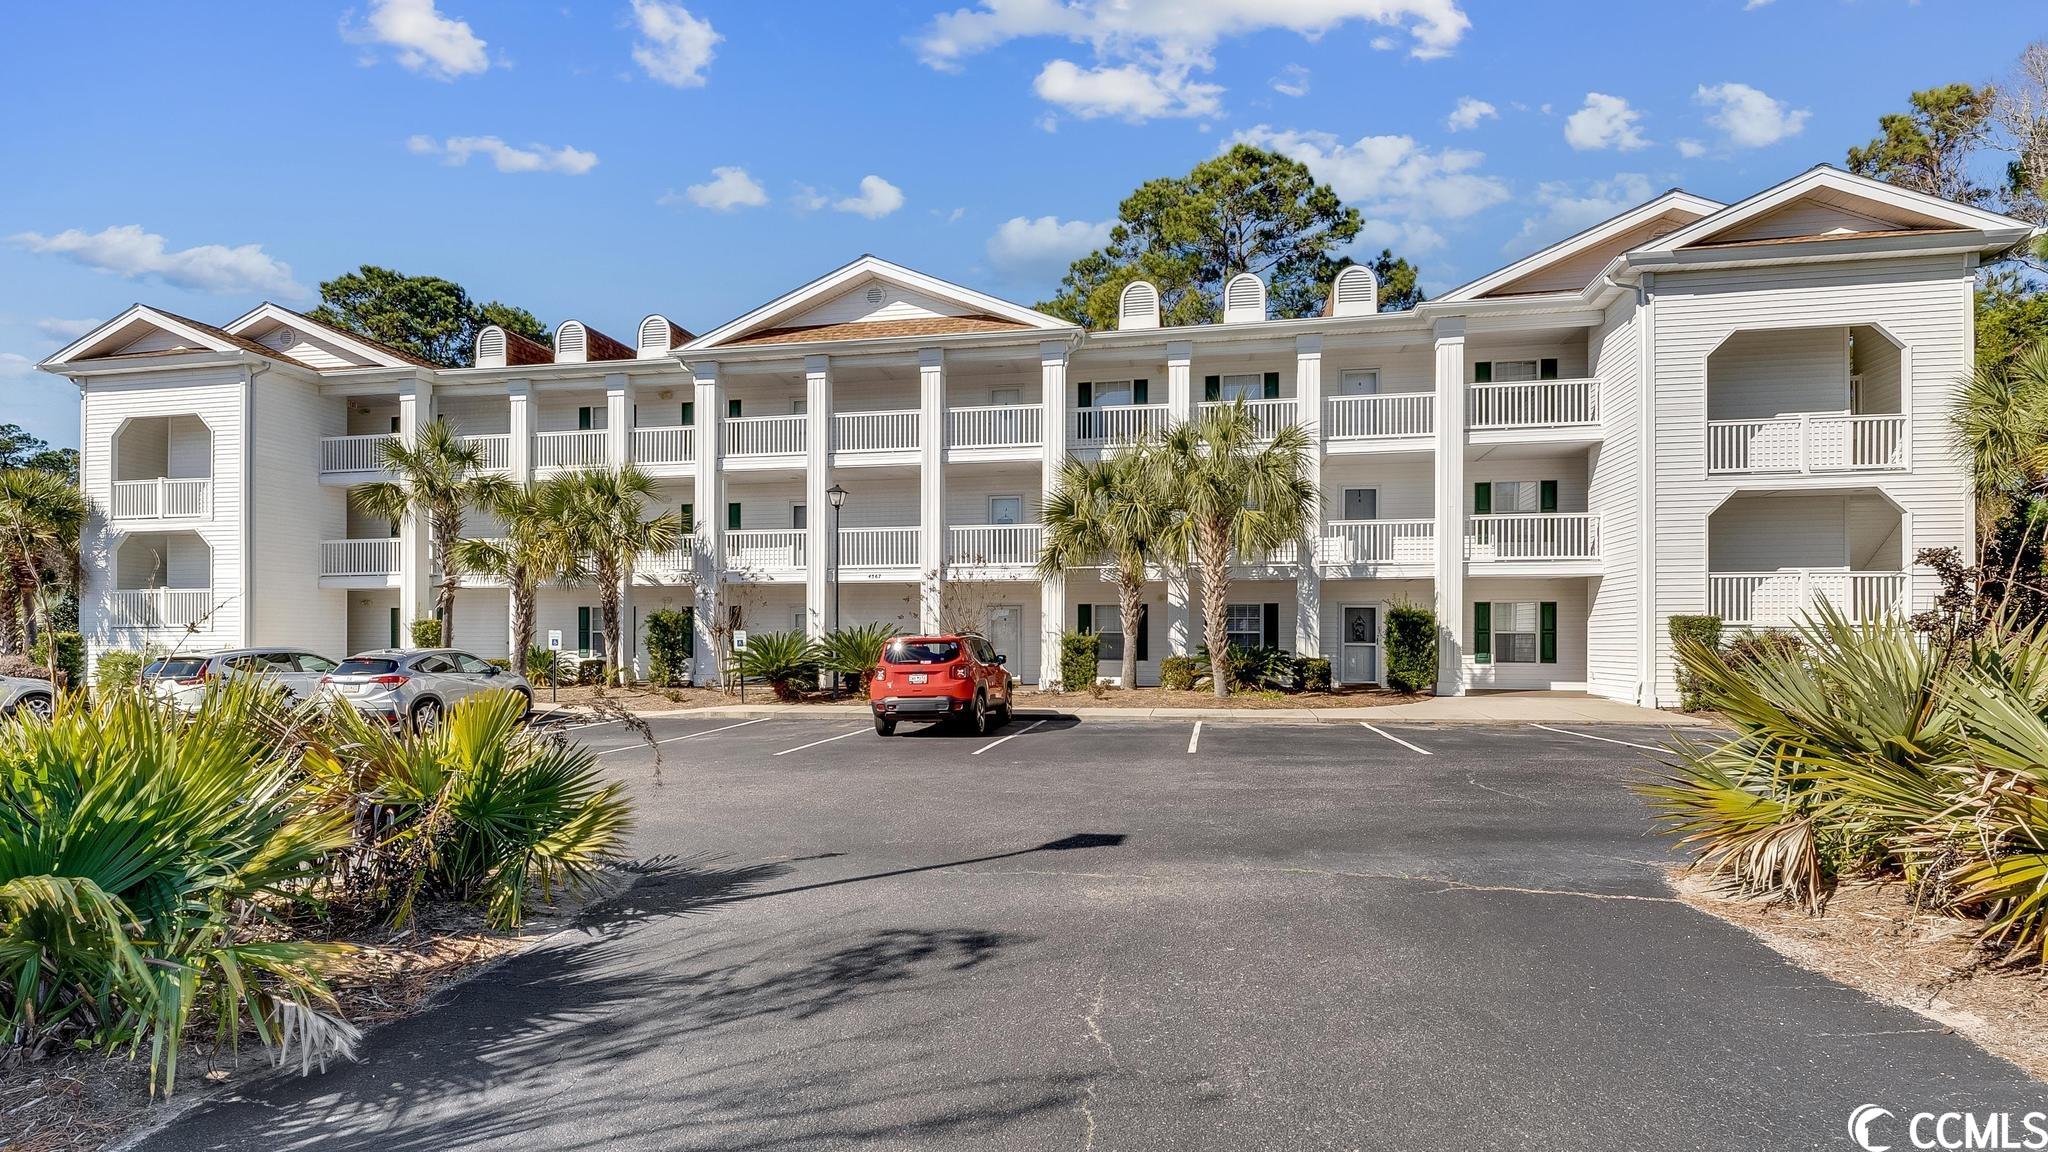 eastport golf villas 2 br/2 ba 3rd floor condo in little river.  community pool! convenient to all that little river, north myrtle beach, calabash, and the grand strand have to offer!